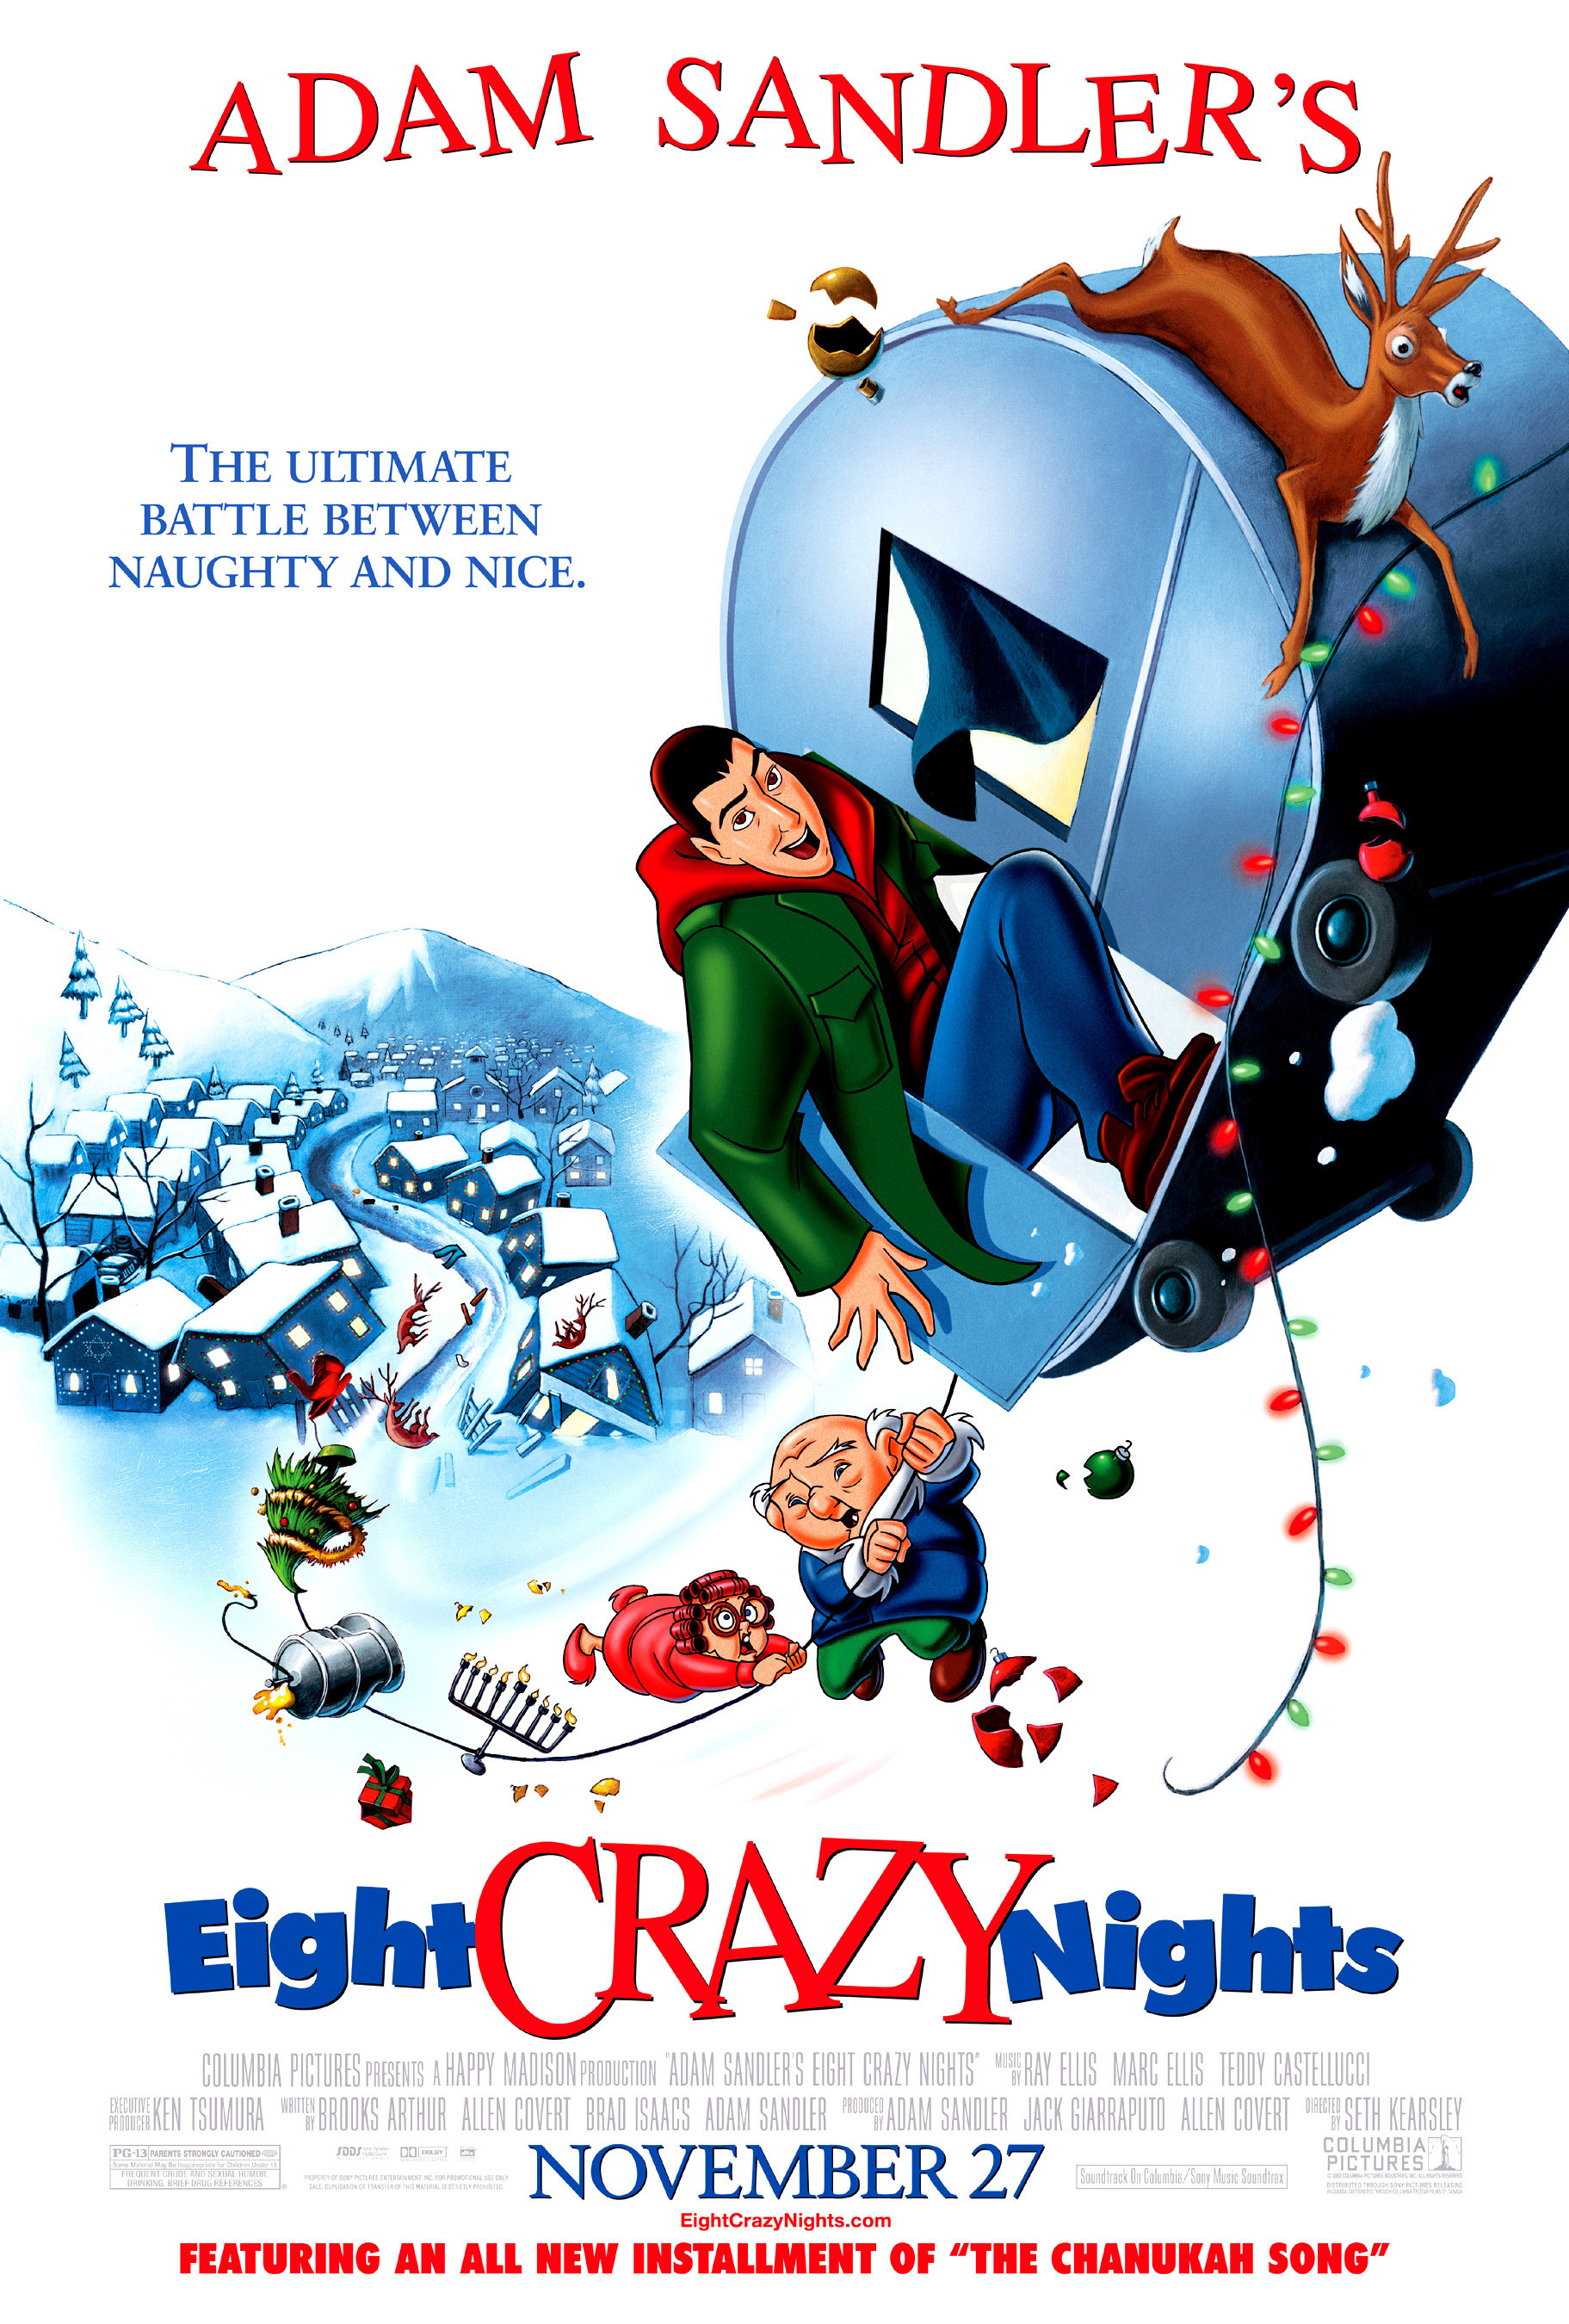 Movie poster shows animated characters with title in blue and red font below